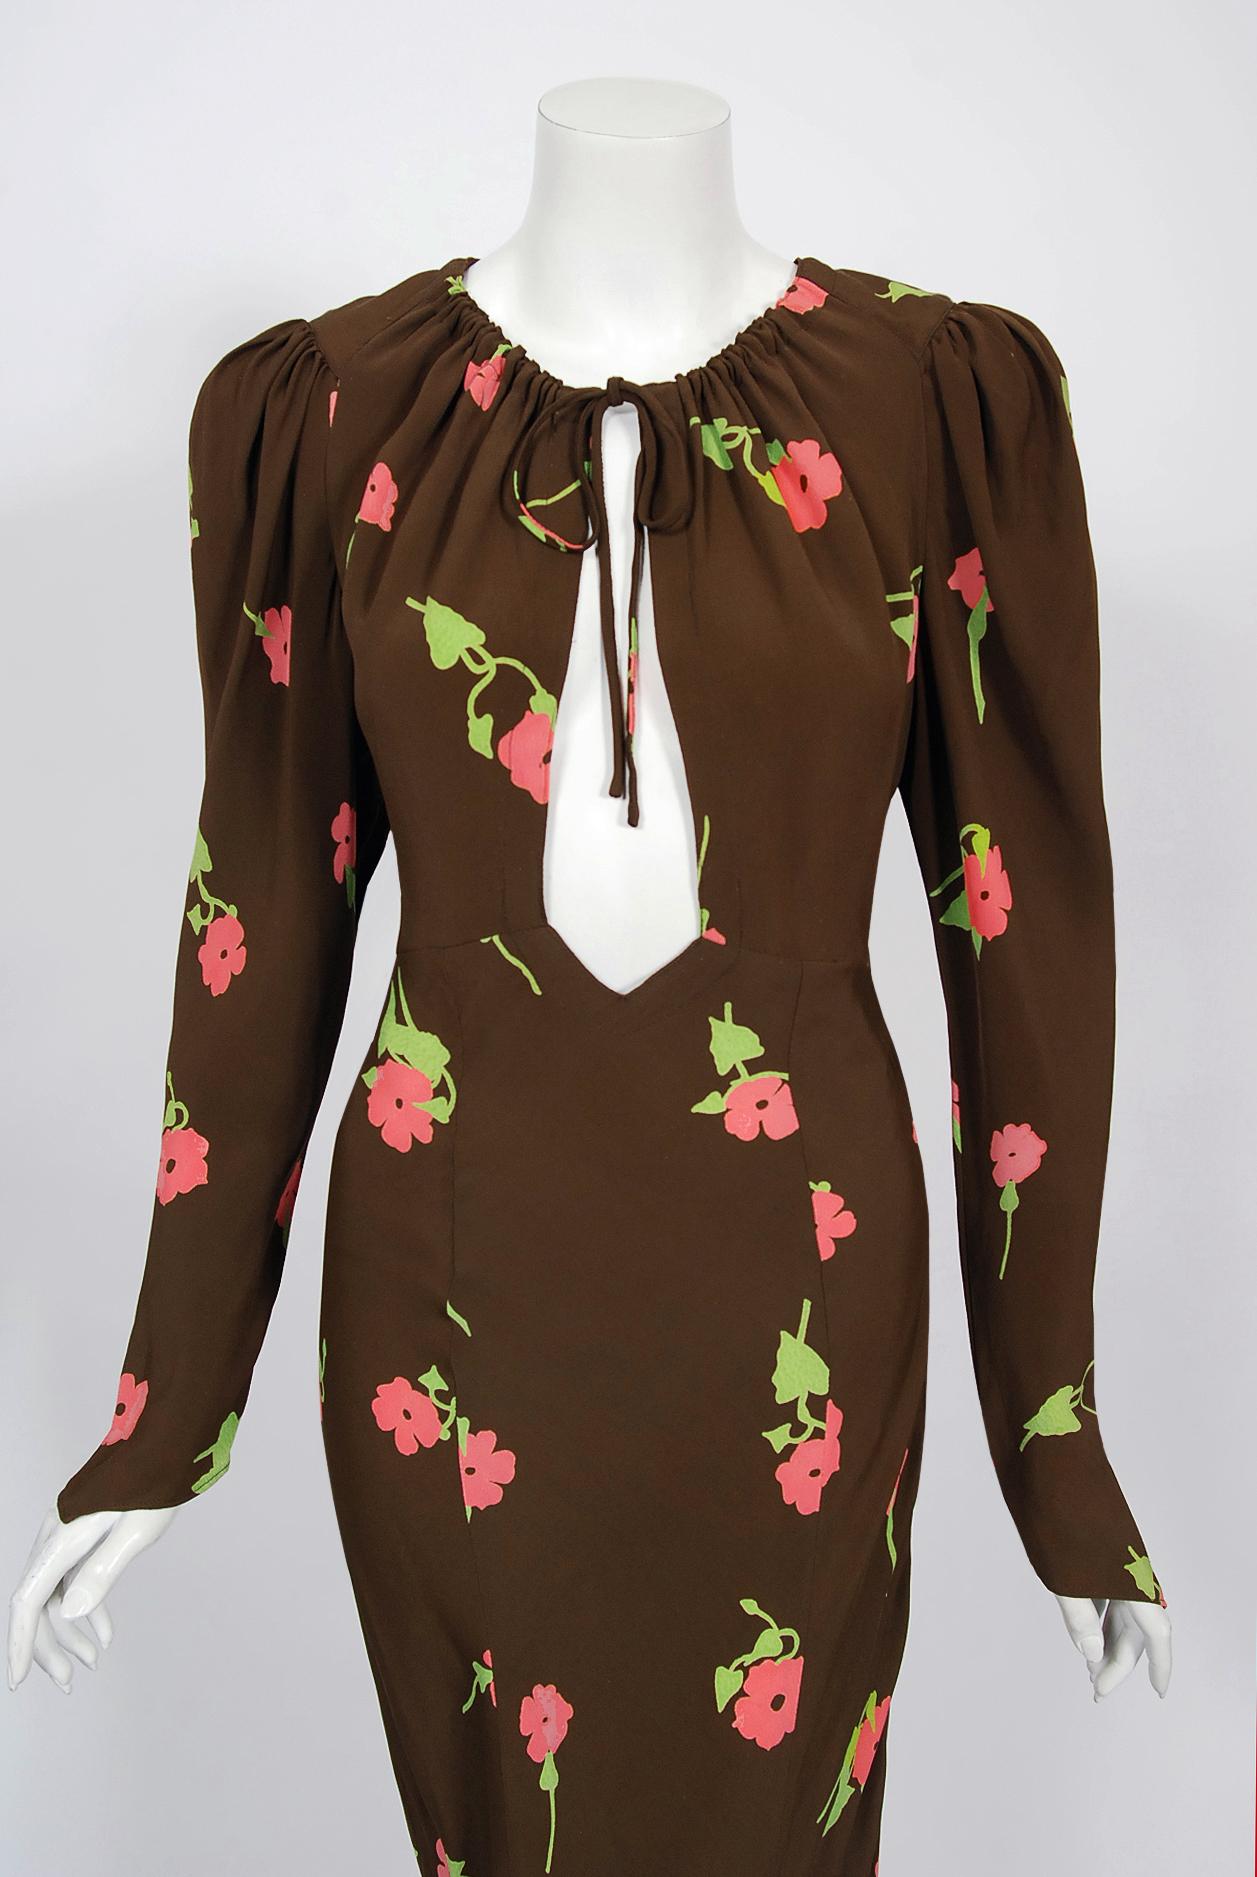 An extremely rare Ossie Clark for Quorum brown rayon crepe bias-cut gown dating back to his 1972 collection. English fashion designer, Raymond Ossie Clark, was a leading light in the London swinging sixties fashion era and is now renowned for his